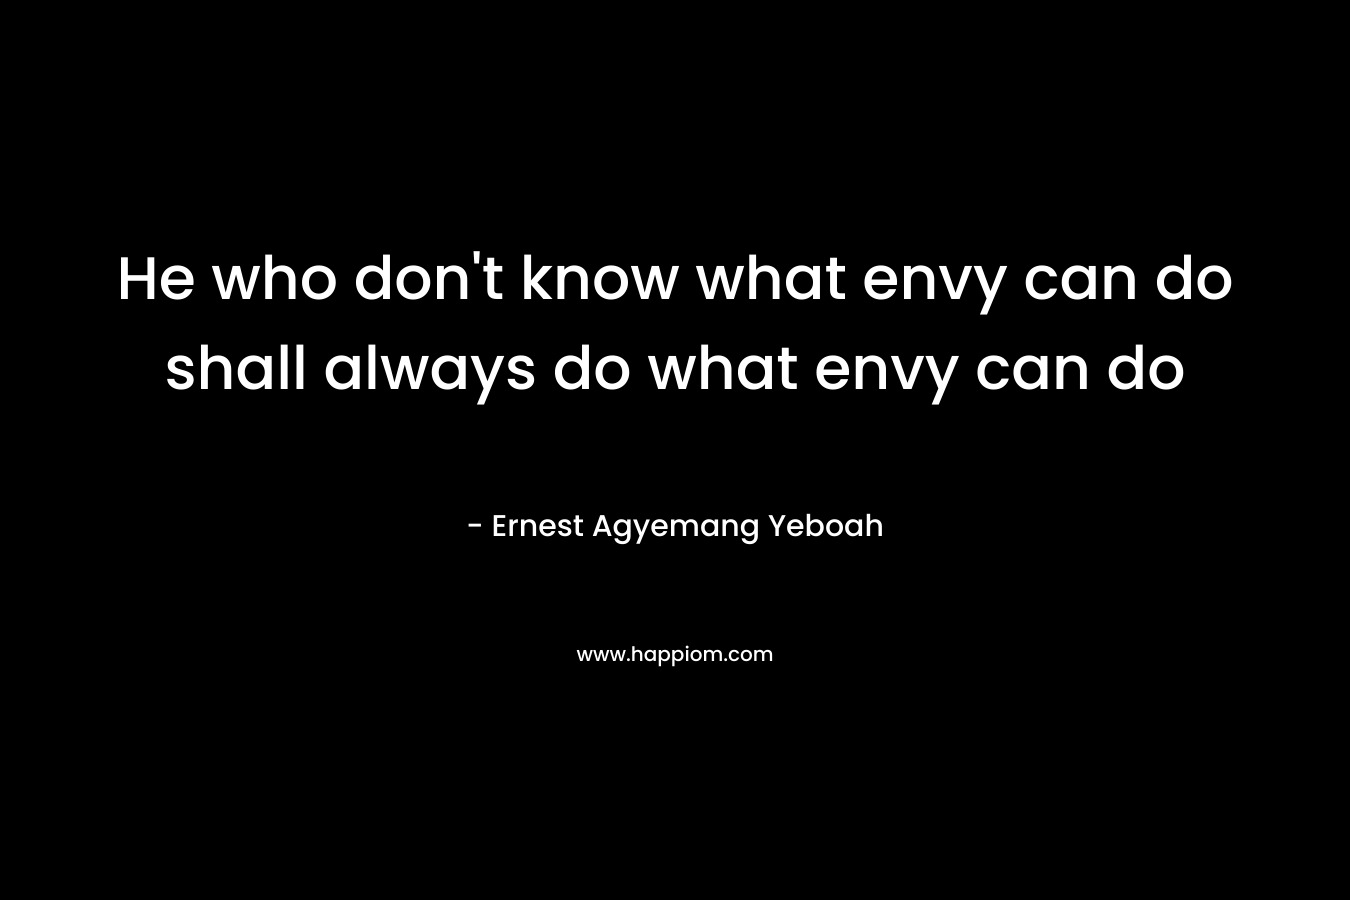 He who don’t know what envy can do shall always do what envy can do – Ernest Agyemang Yeboah